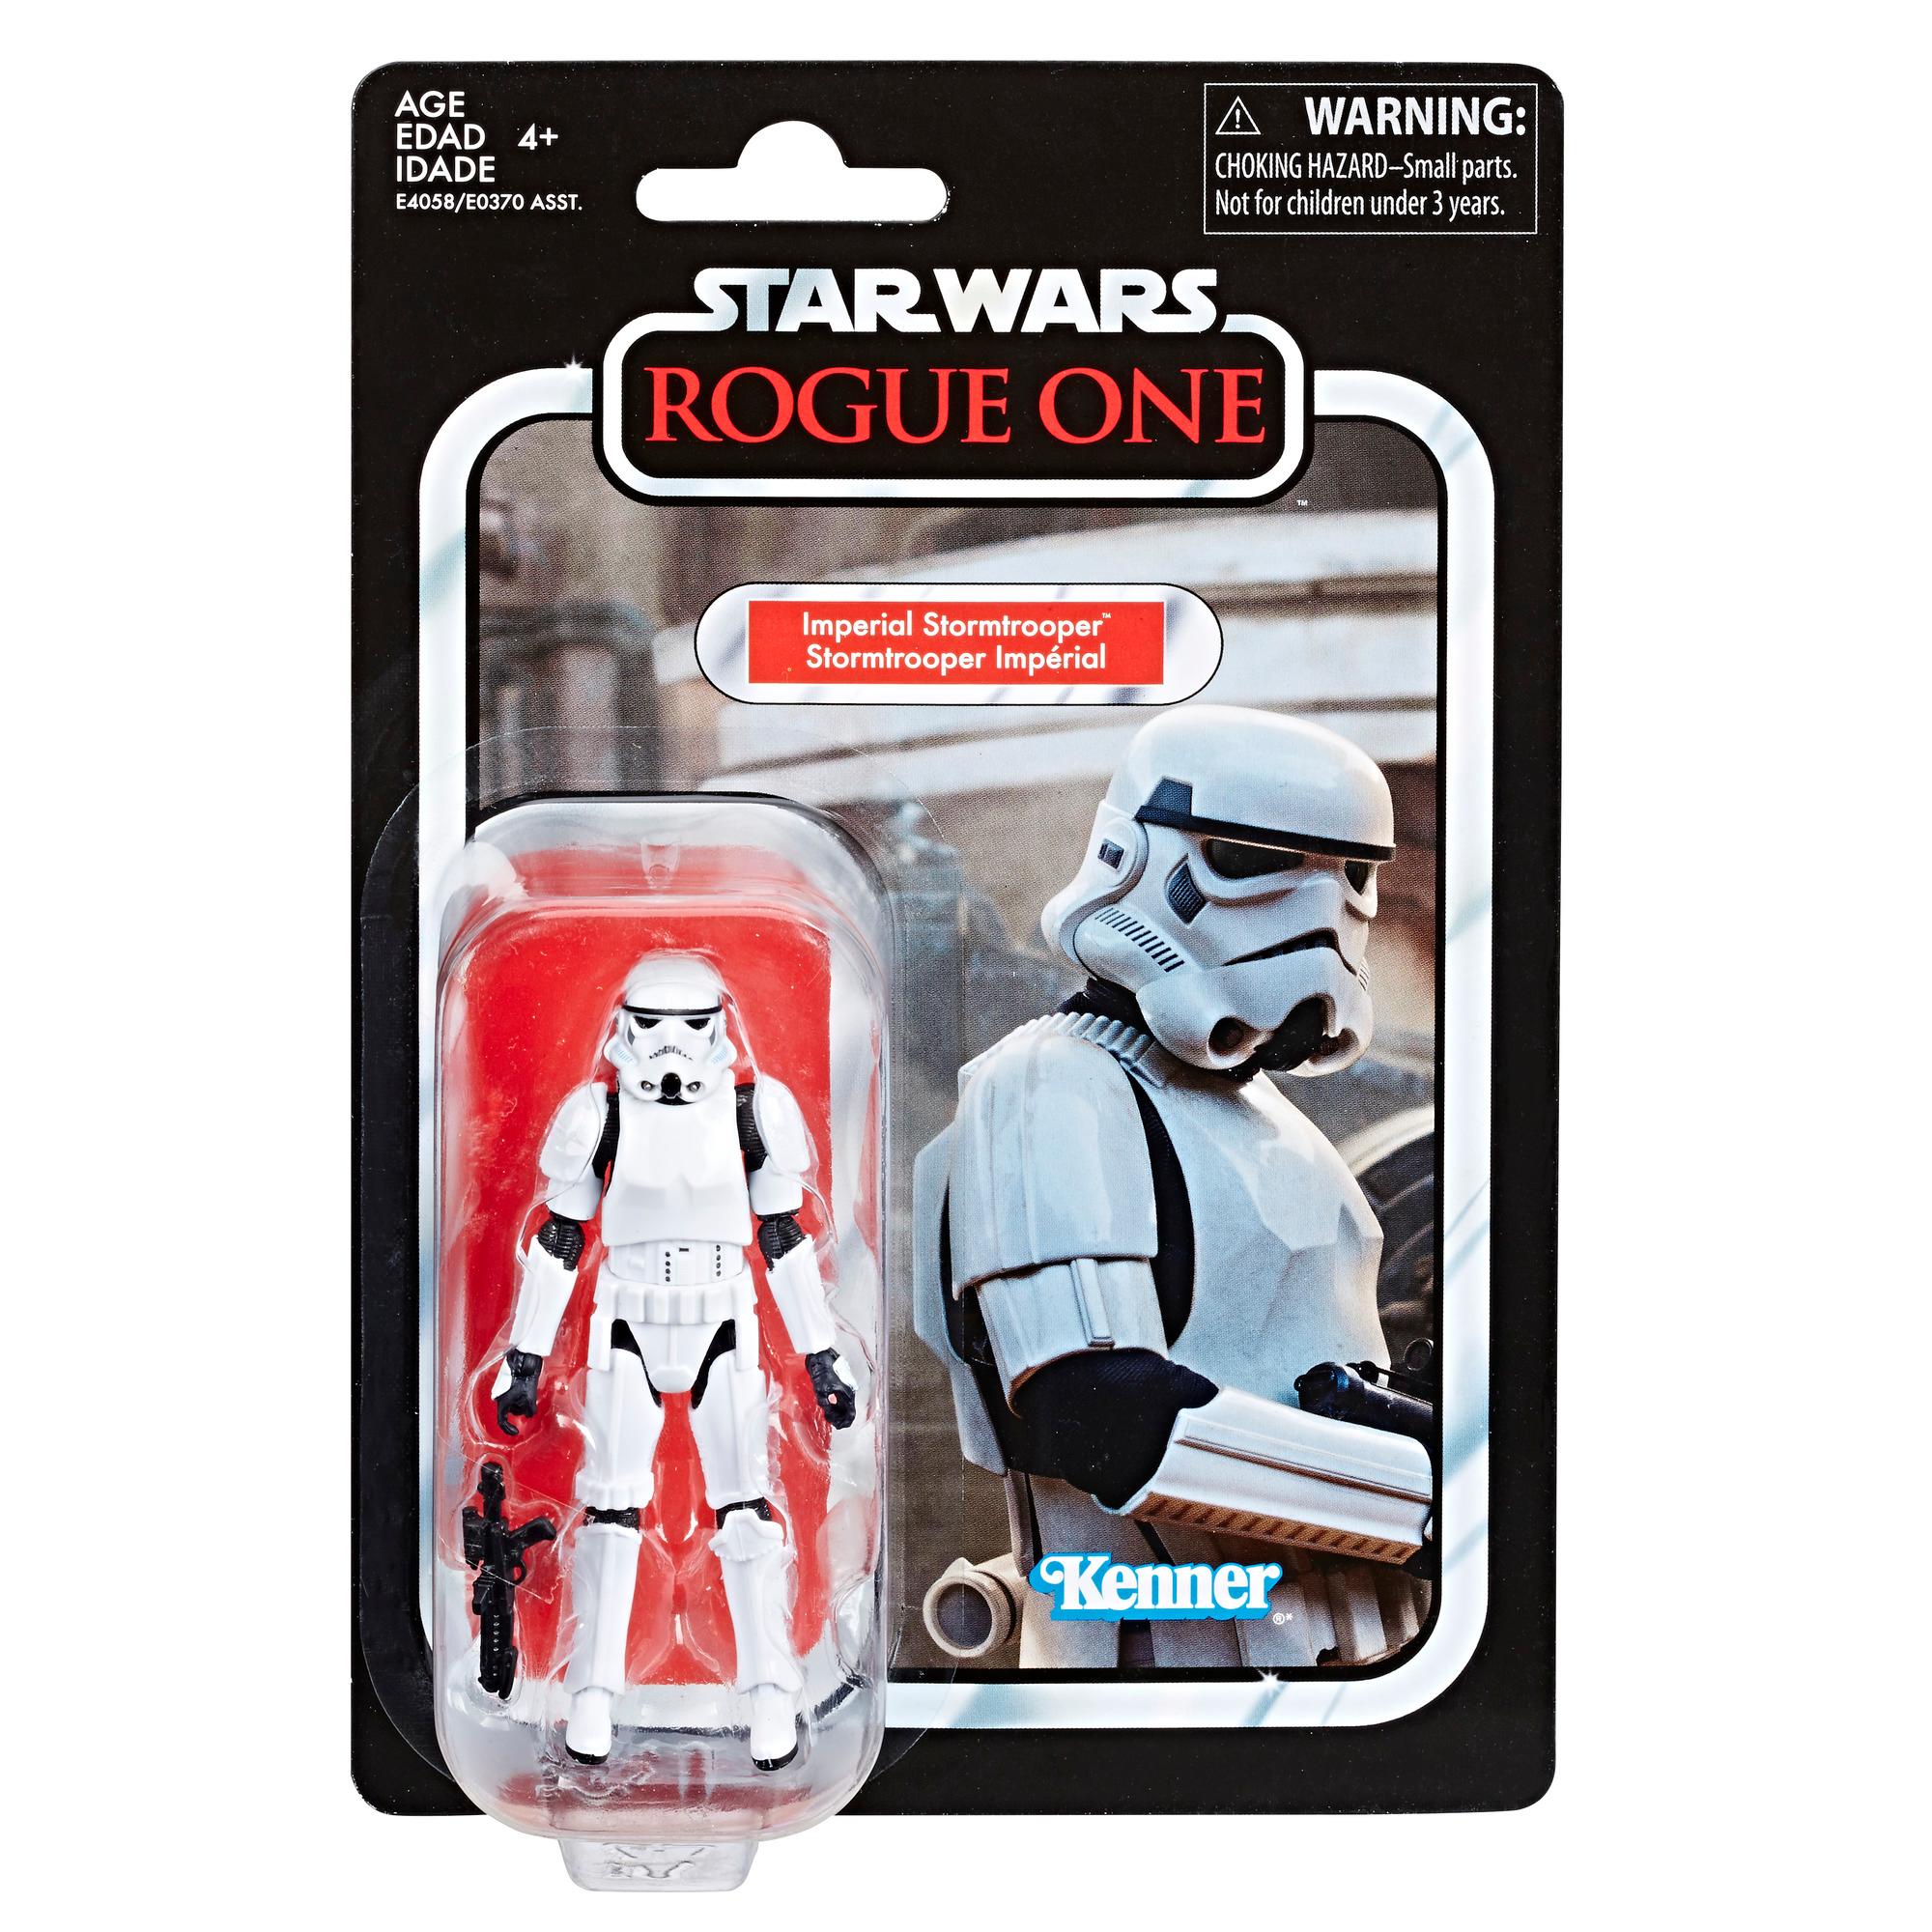 Star Wars Retro Collection Figure w/protector Stormtrooper 3.75 **IN STOCK***